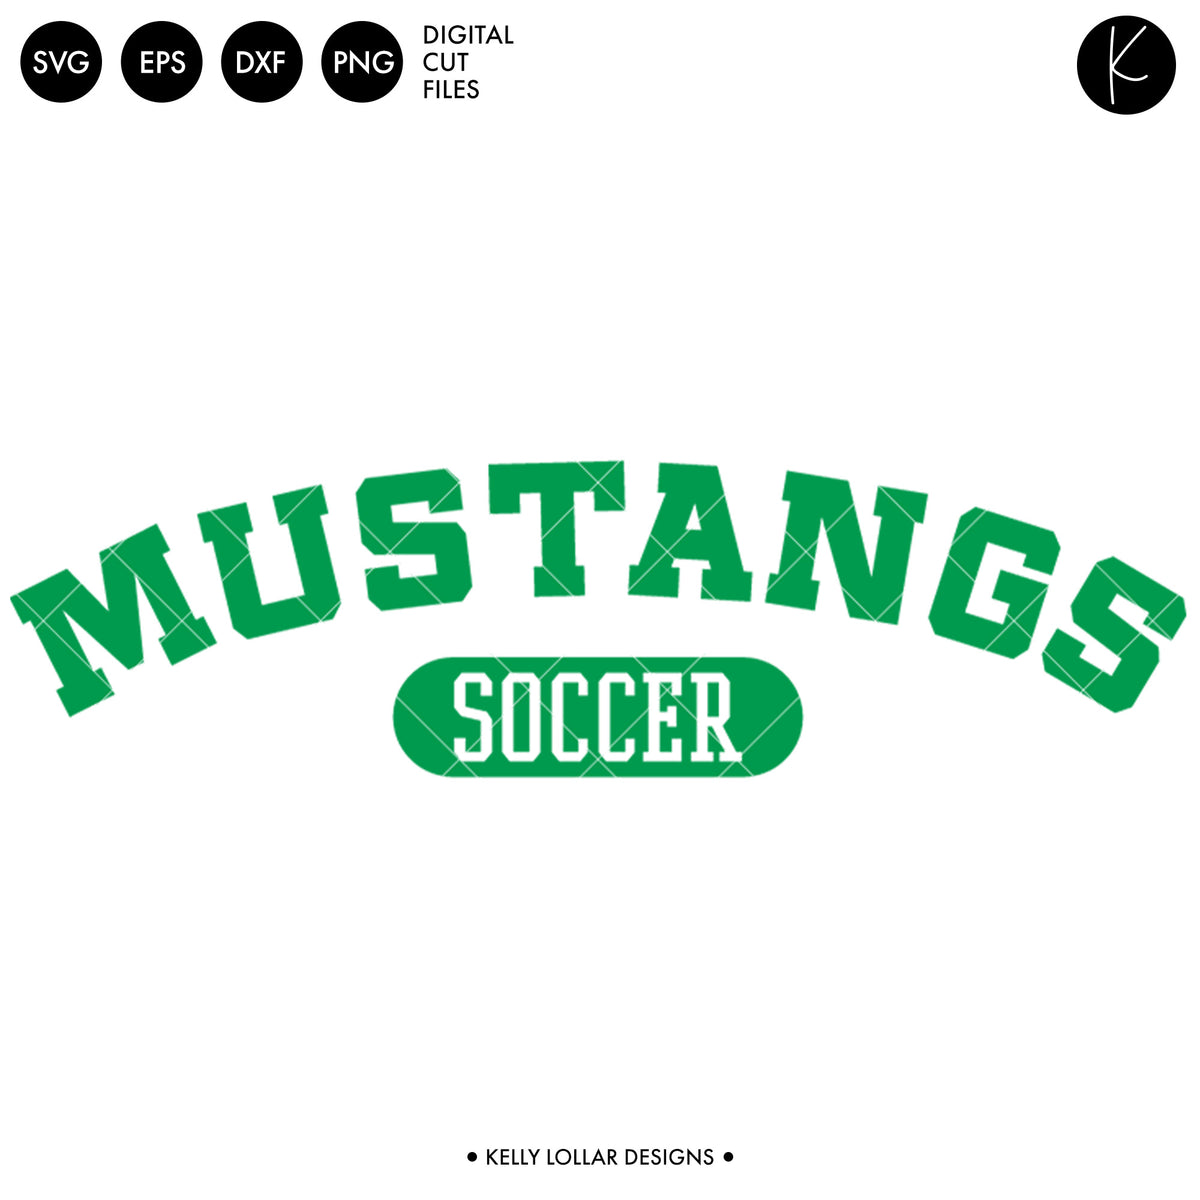 Mustangs Soccer and Football Bundle | SVG DXF EPS PNG Cut Files